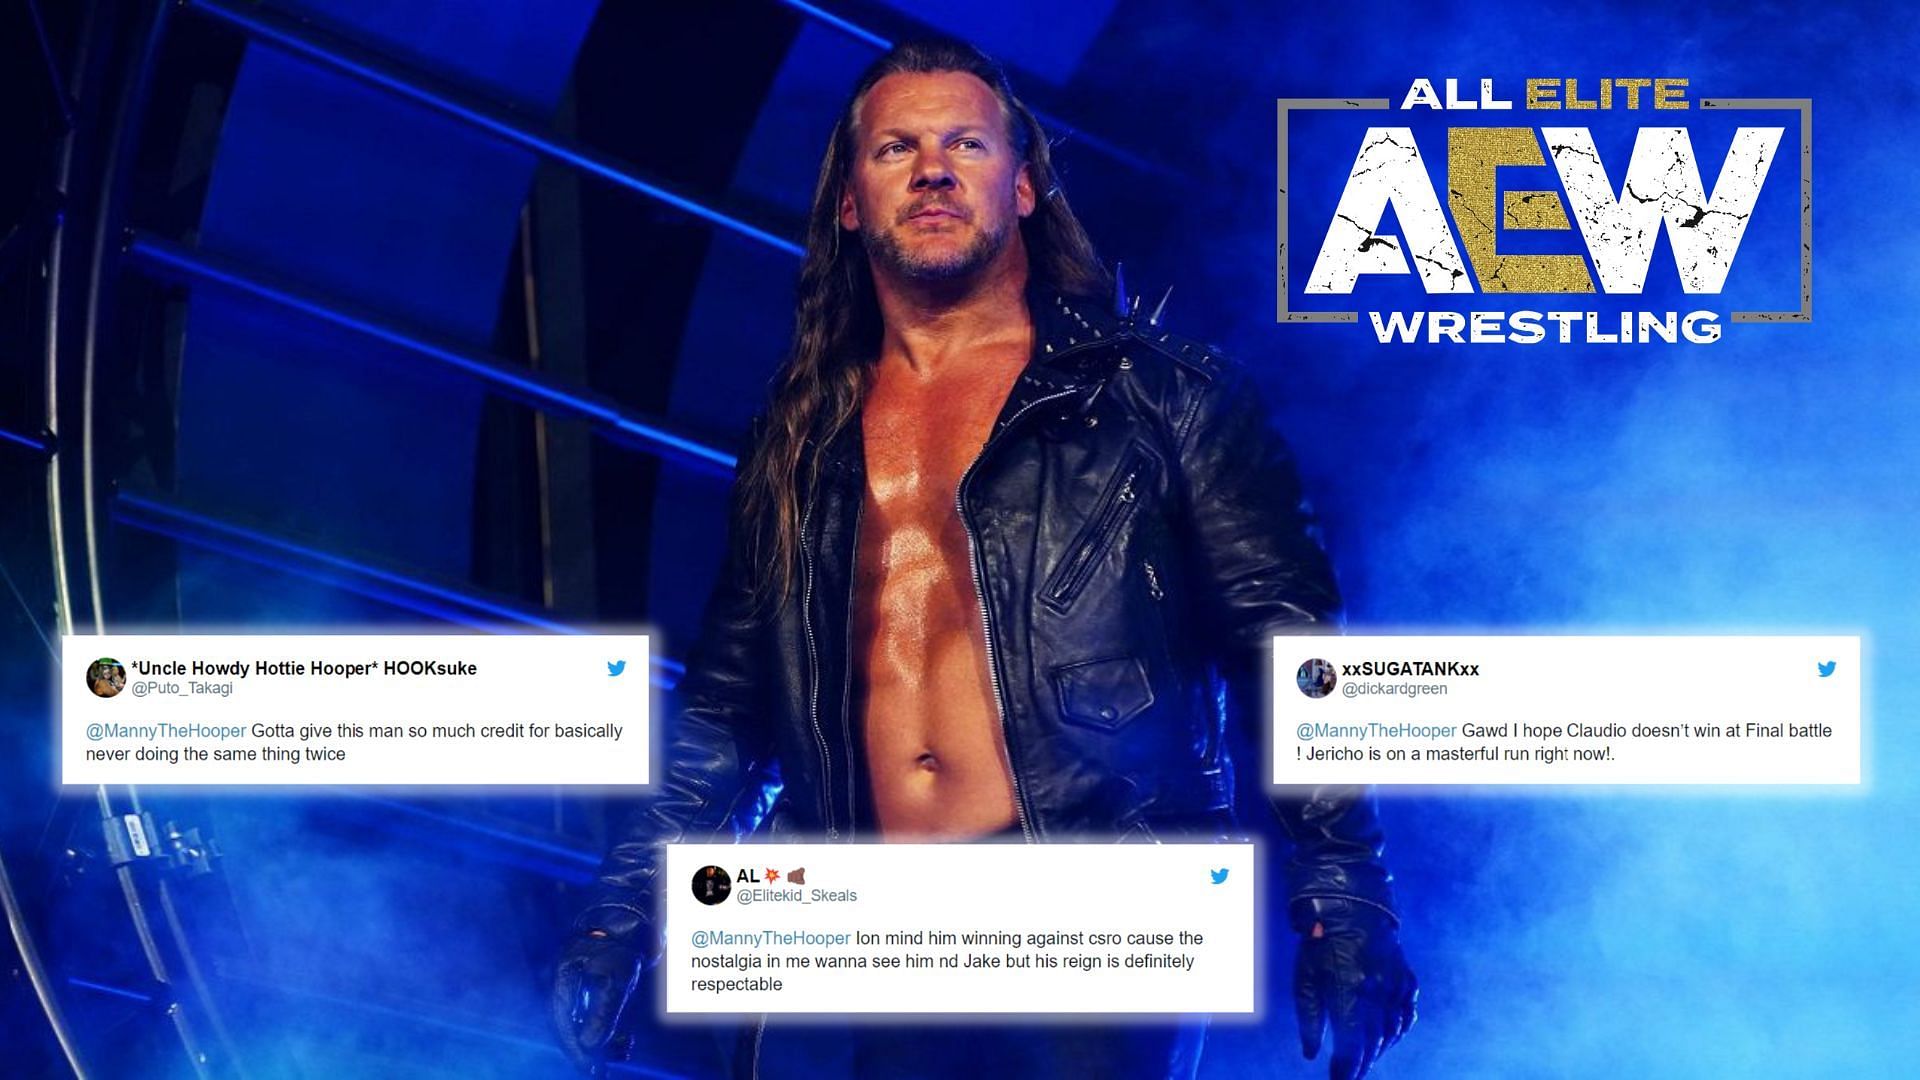 Chris Jericho was recently praised by fans